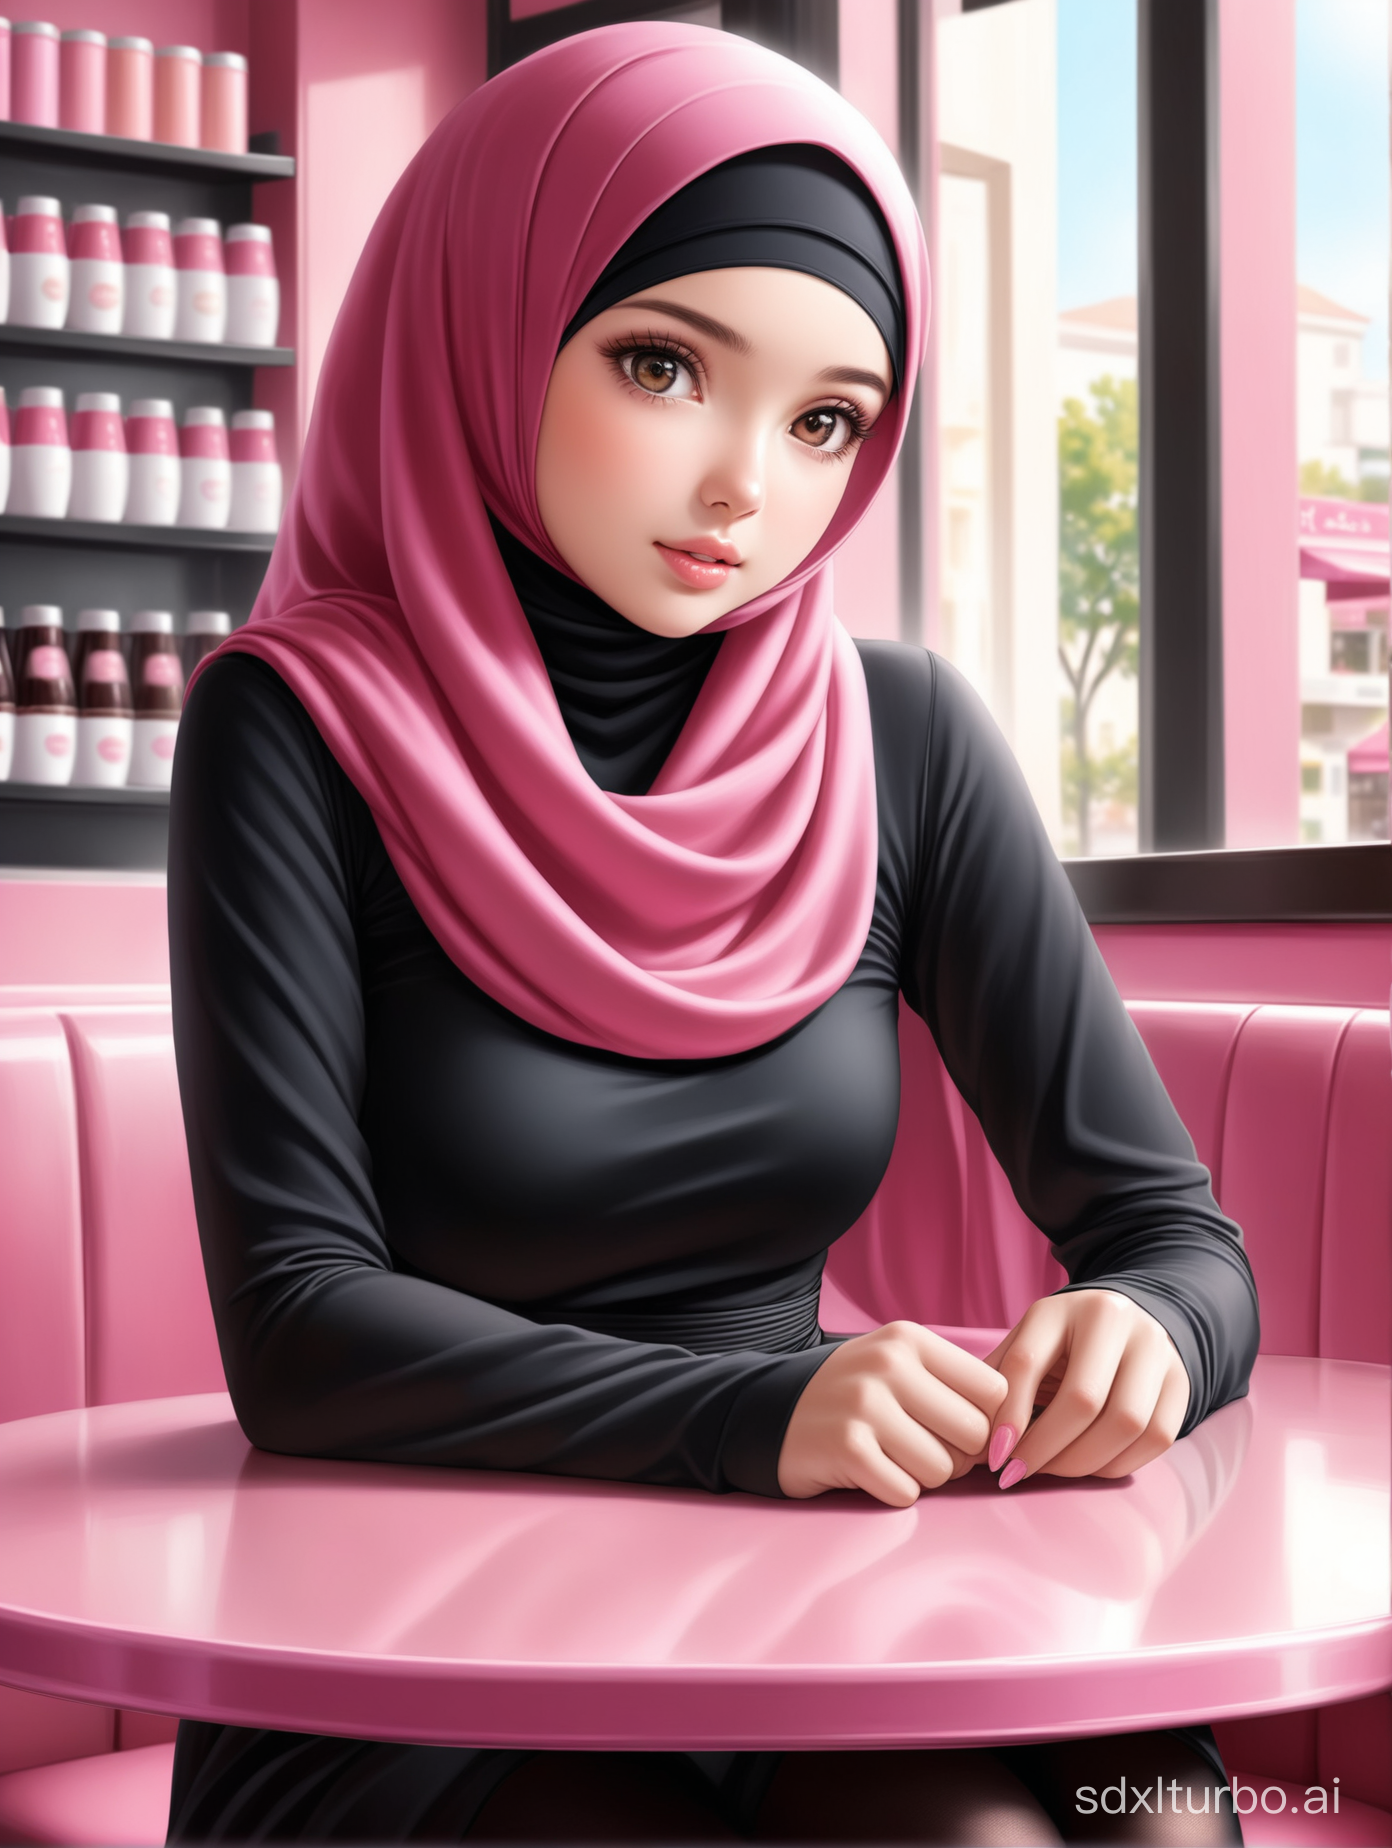 cute girl with pink hijab, wearing black muslim  dress and black tights, sitting in a pink cafe, elegant, photorealistic,high quality, high details, lovely, adorable